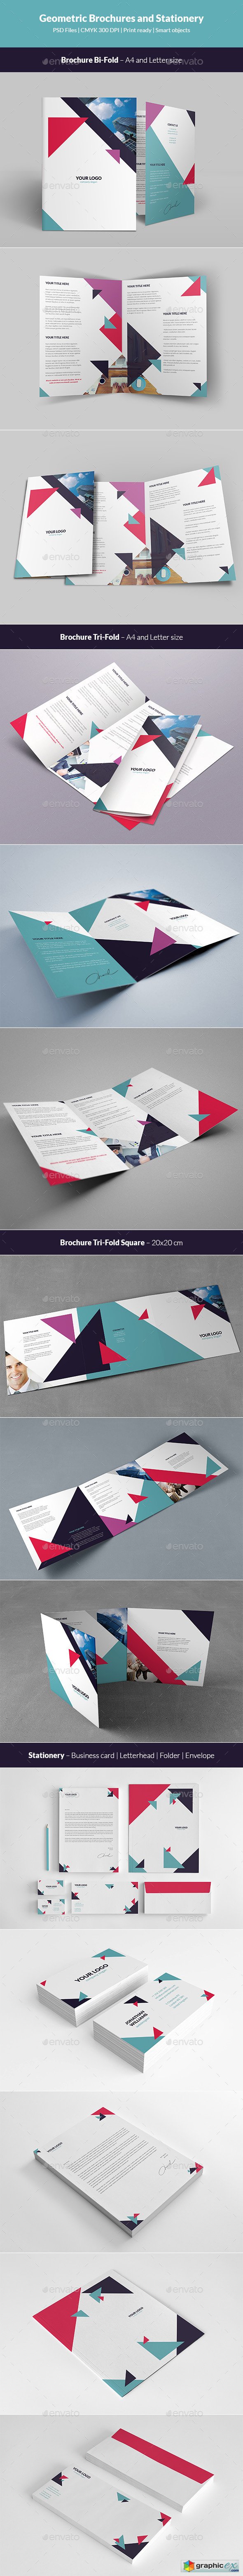 Geometric Brochures and Stationery